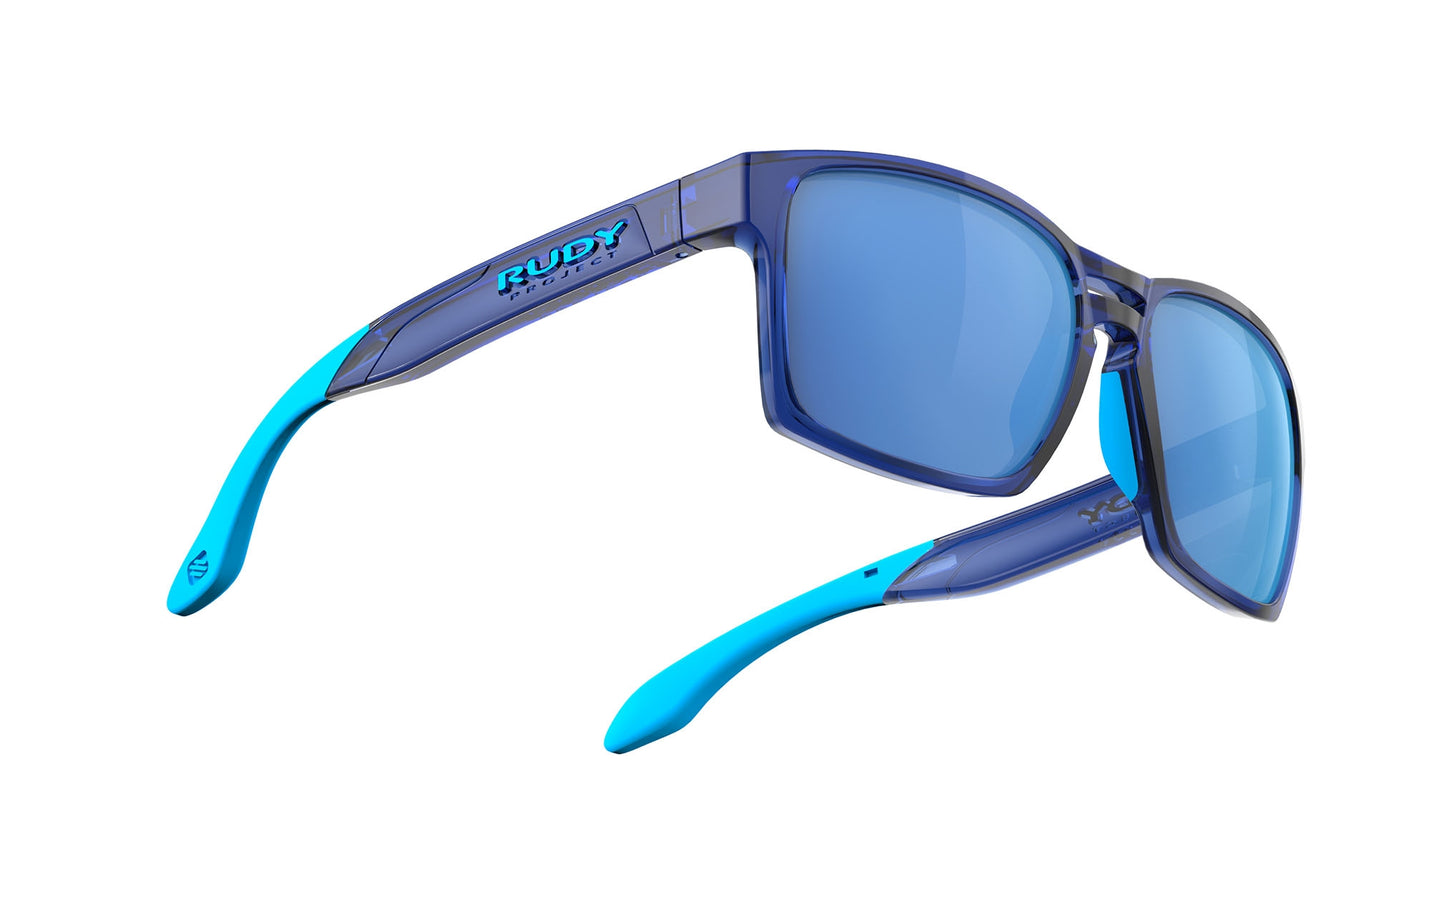 Load image into Gallery viewer, Rudy Project Spinair 57 Crystal Blue - Rp Optics Multilaser Blue Sunglasses
